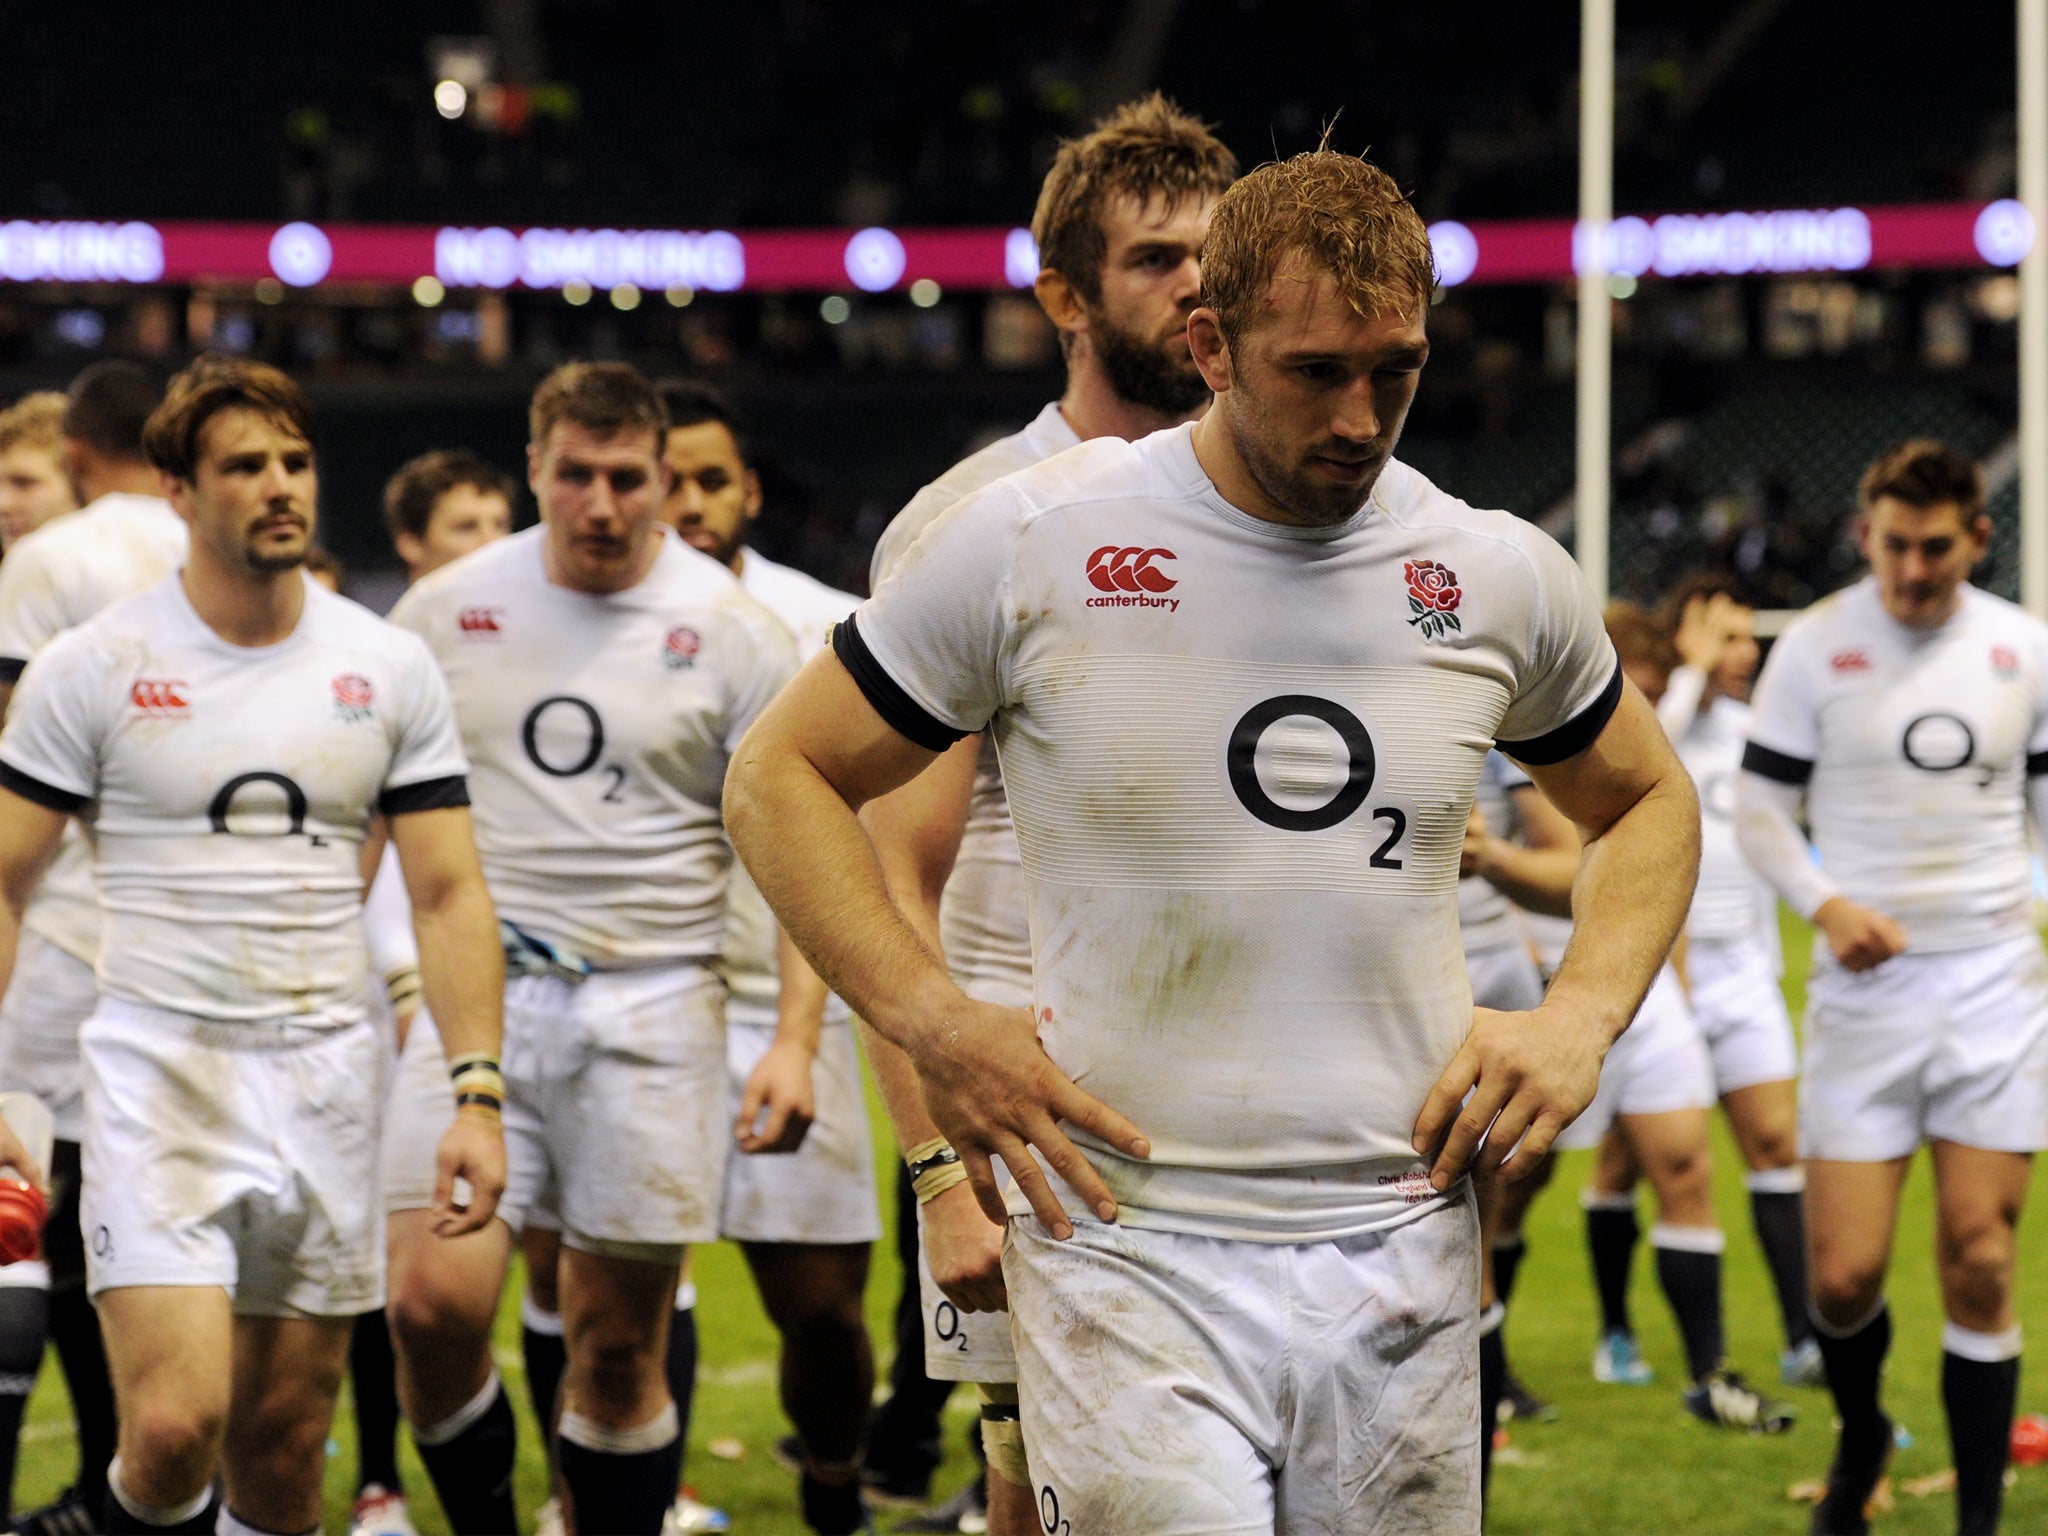 A proud yet dejected Chris Robshaw leas the England side off the pitch